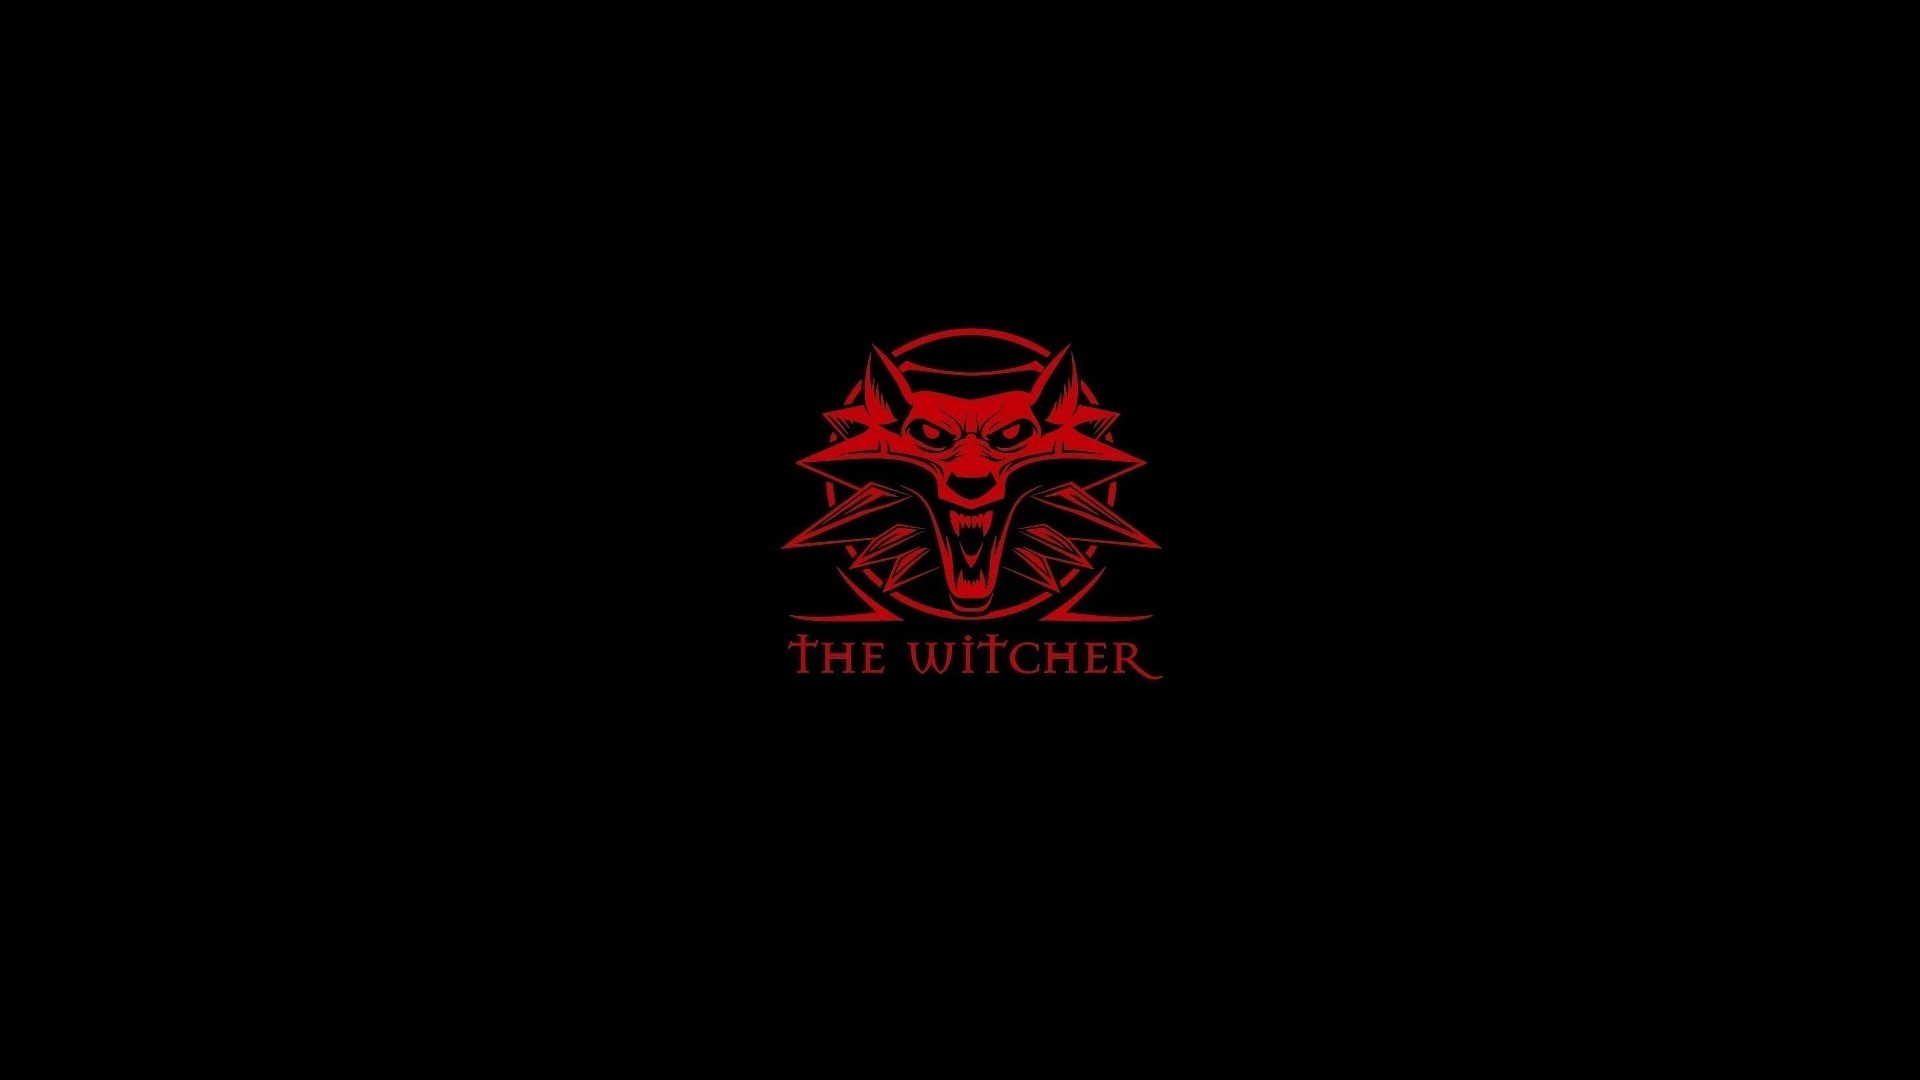 The Witcher Computer Wallpapers Desktop Backgrounds 1920x1080 ID 1920x1080